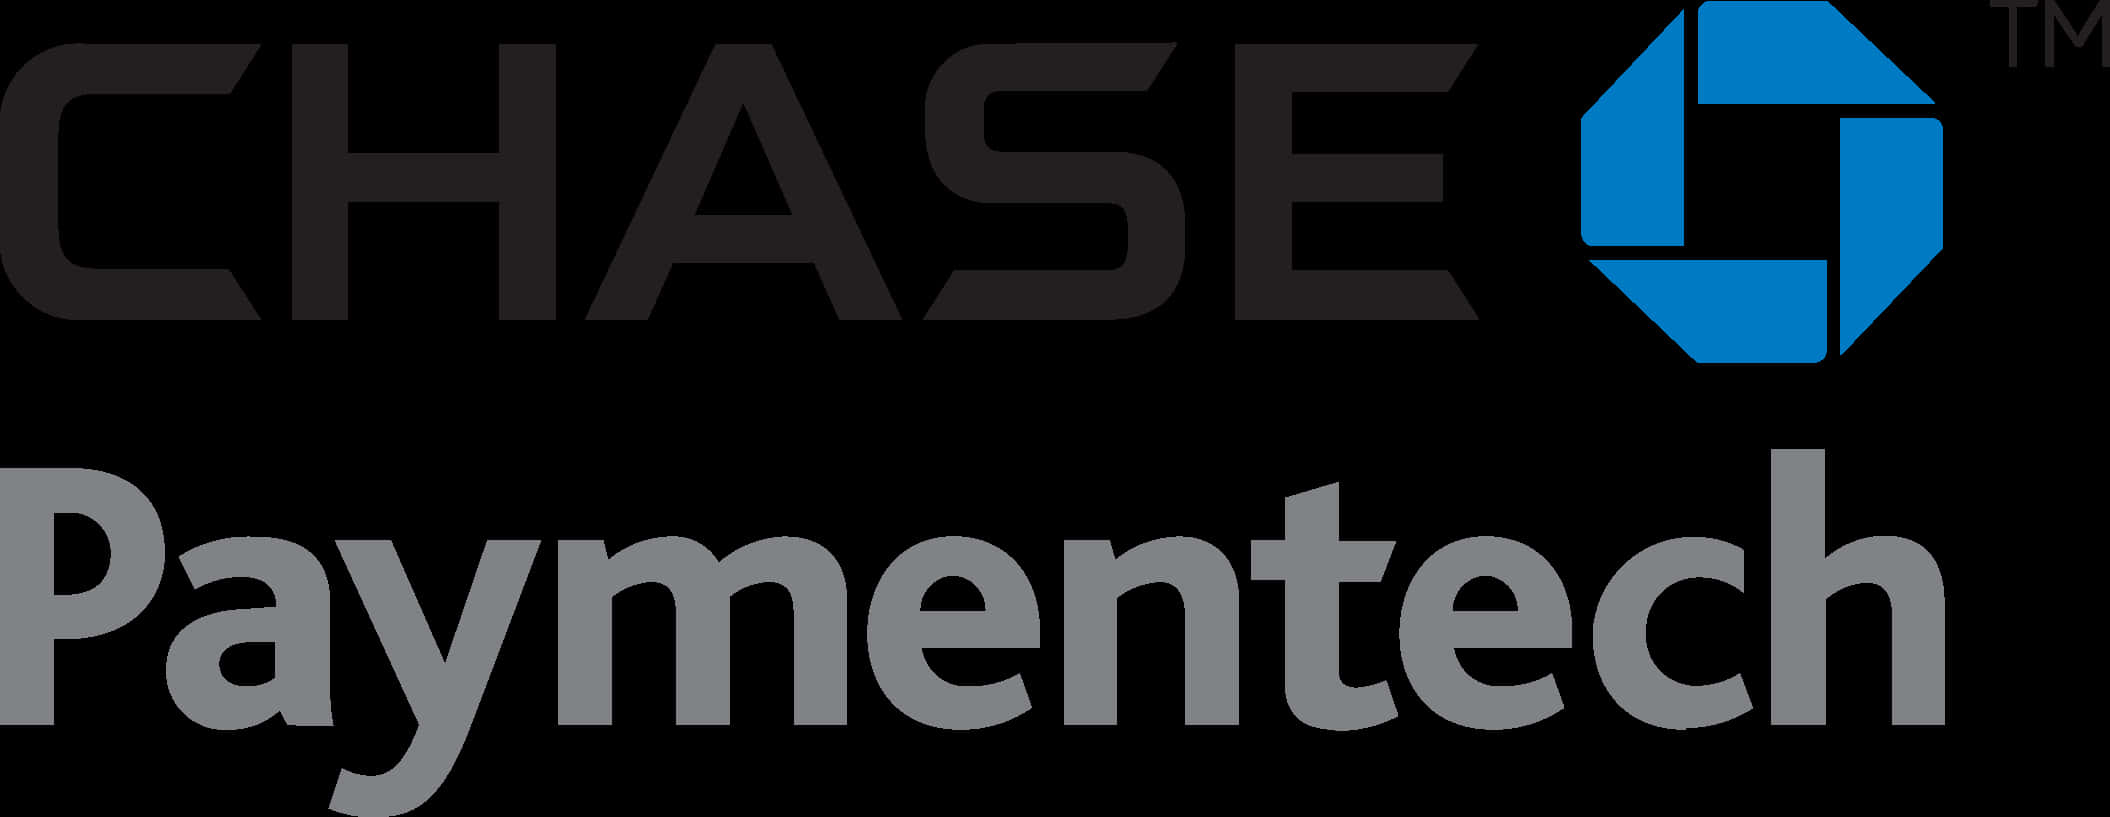 Chase Paymentech Logo PNG